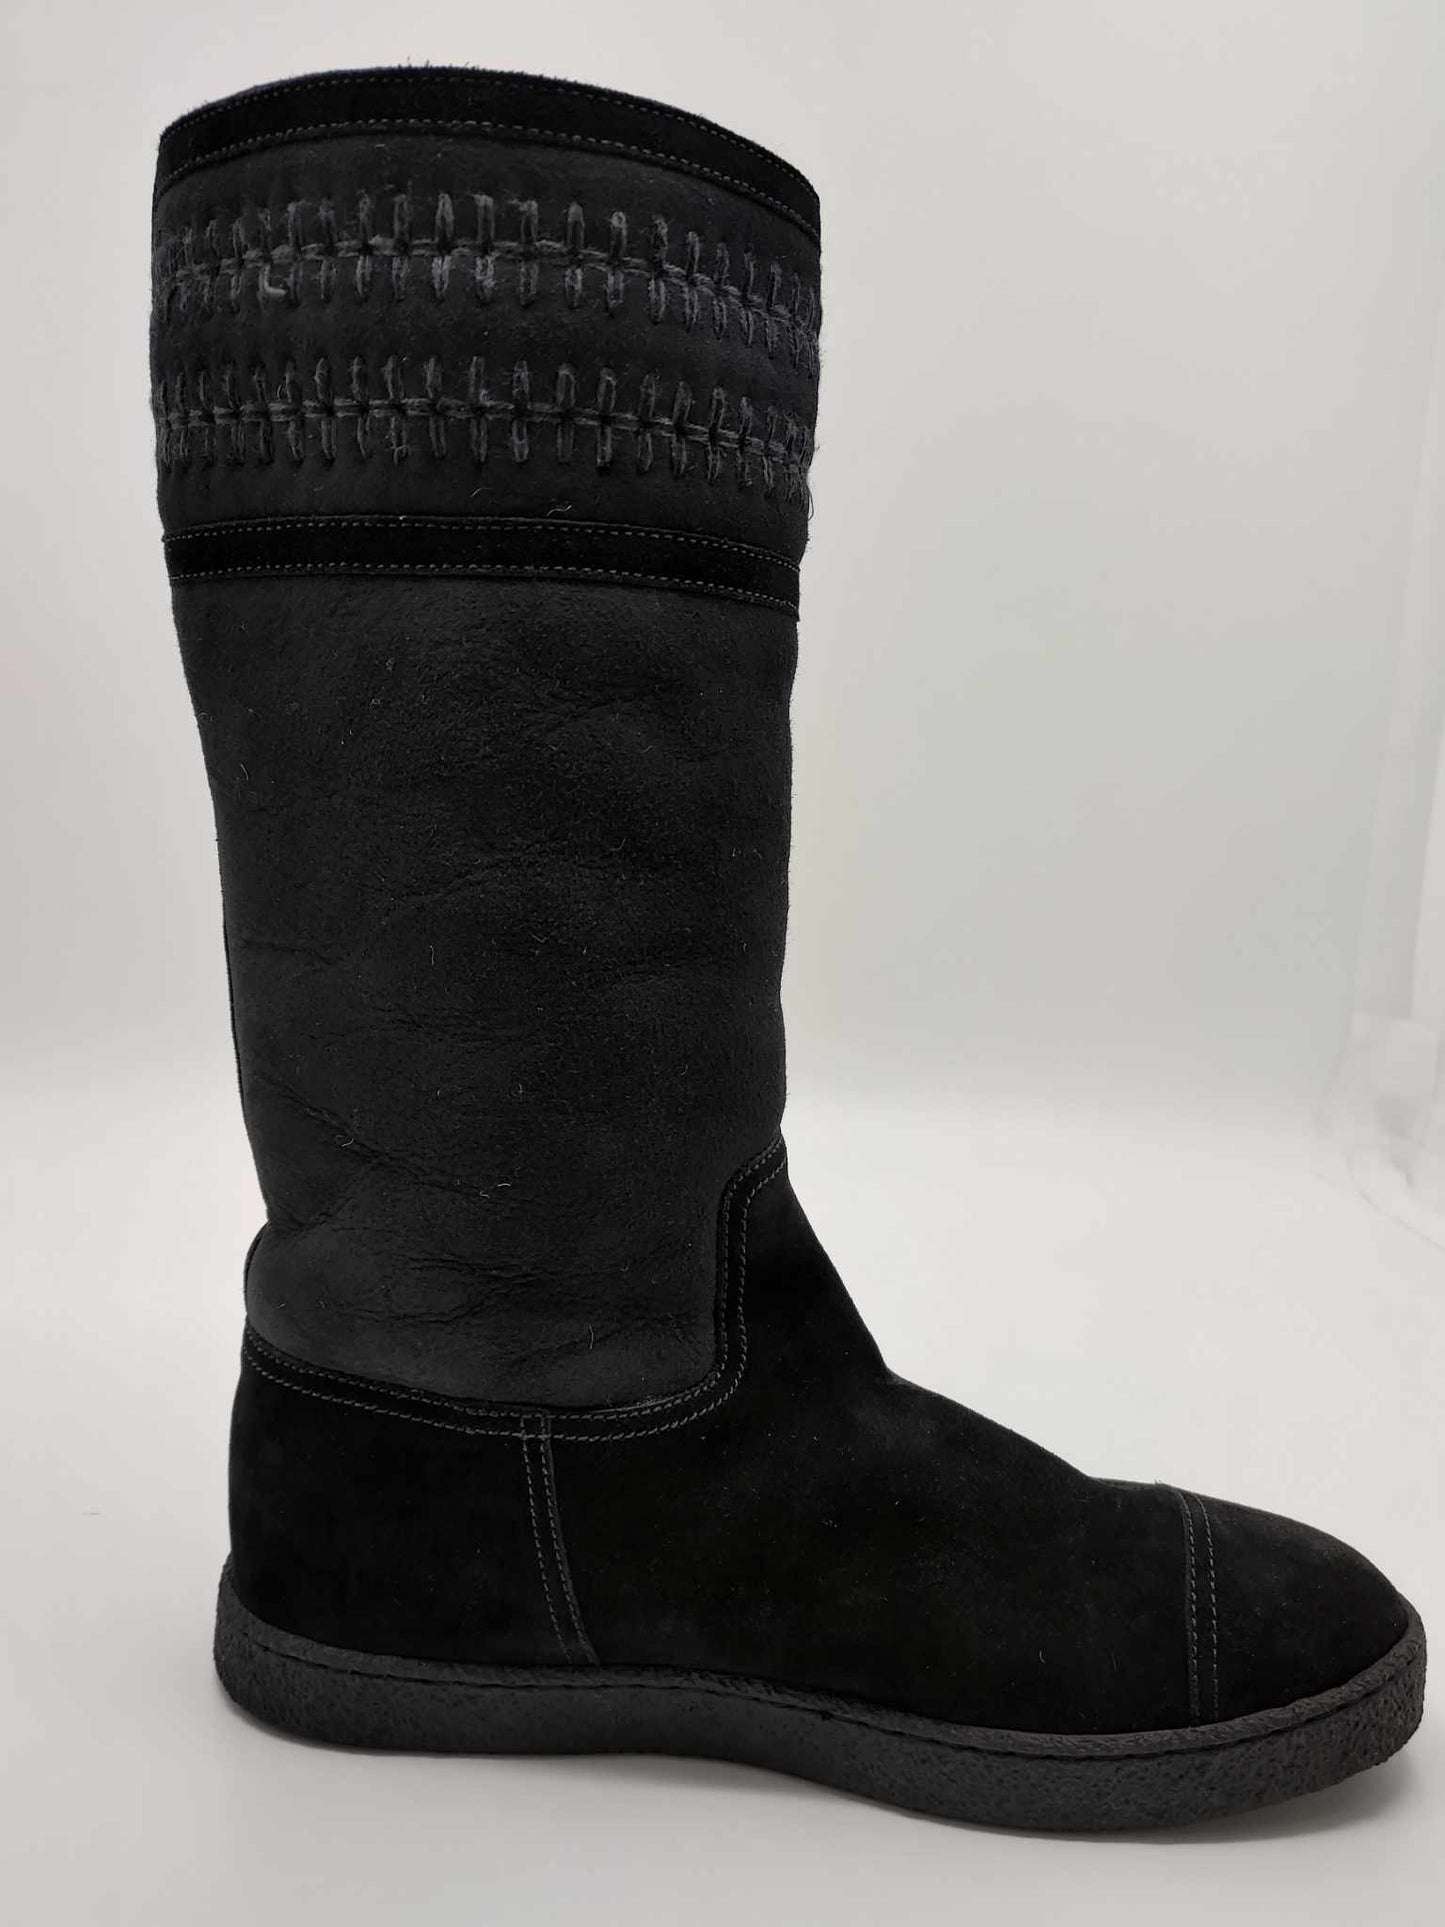 Chanel Boots in Black Suede